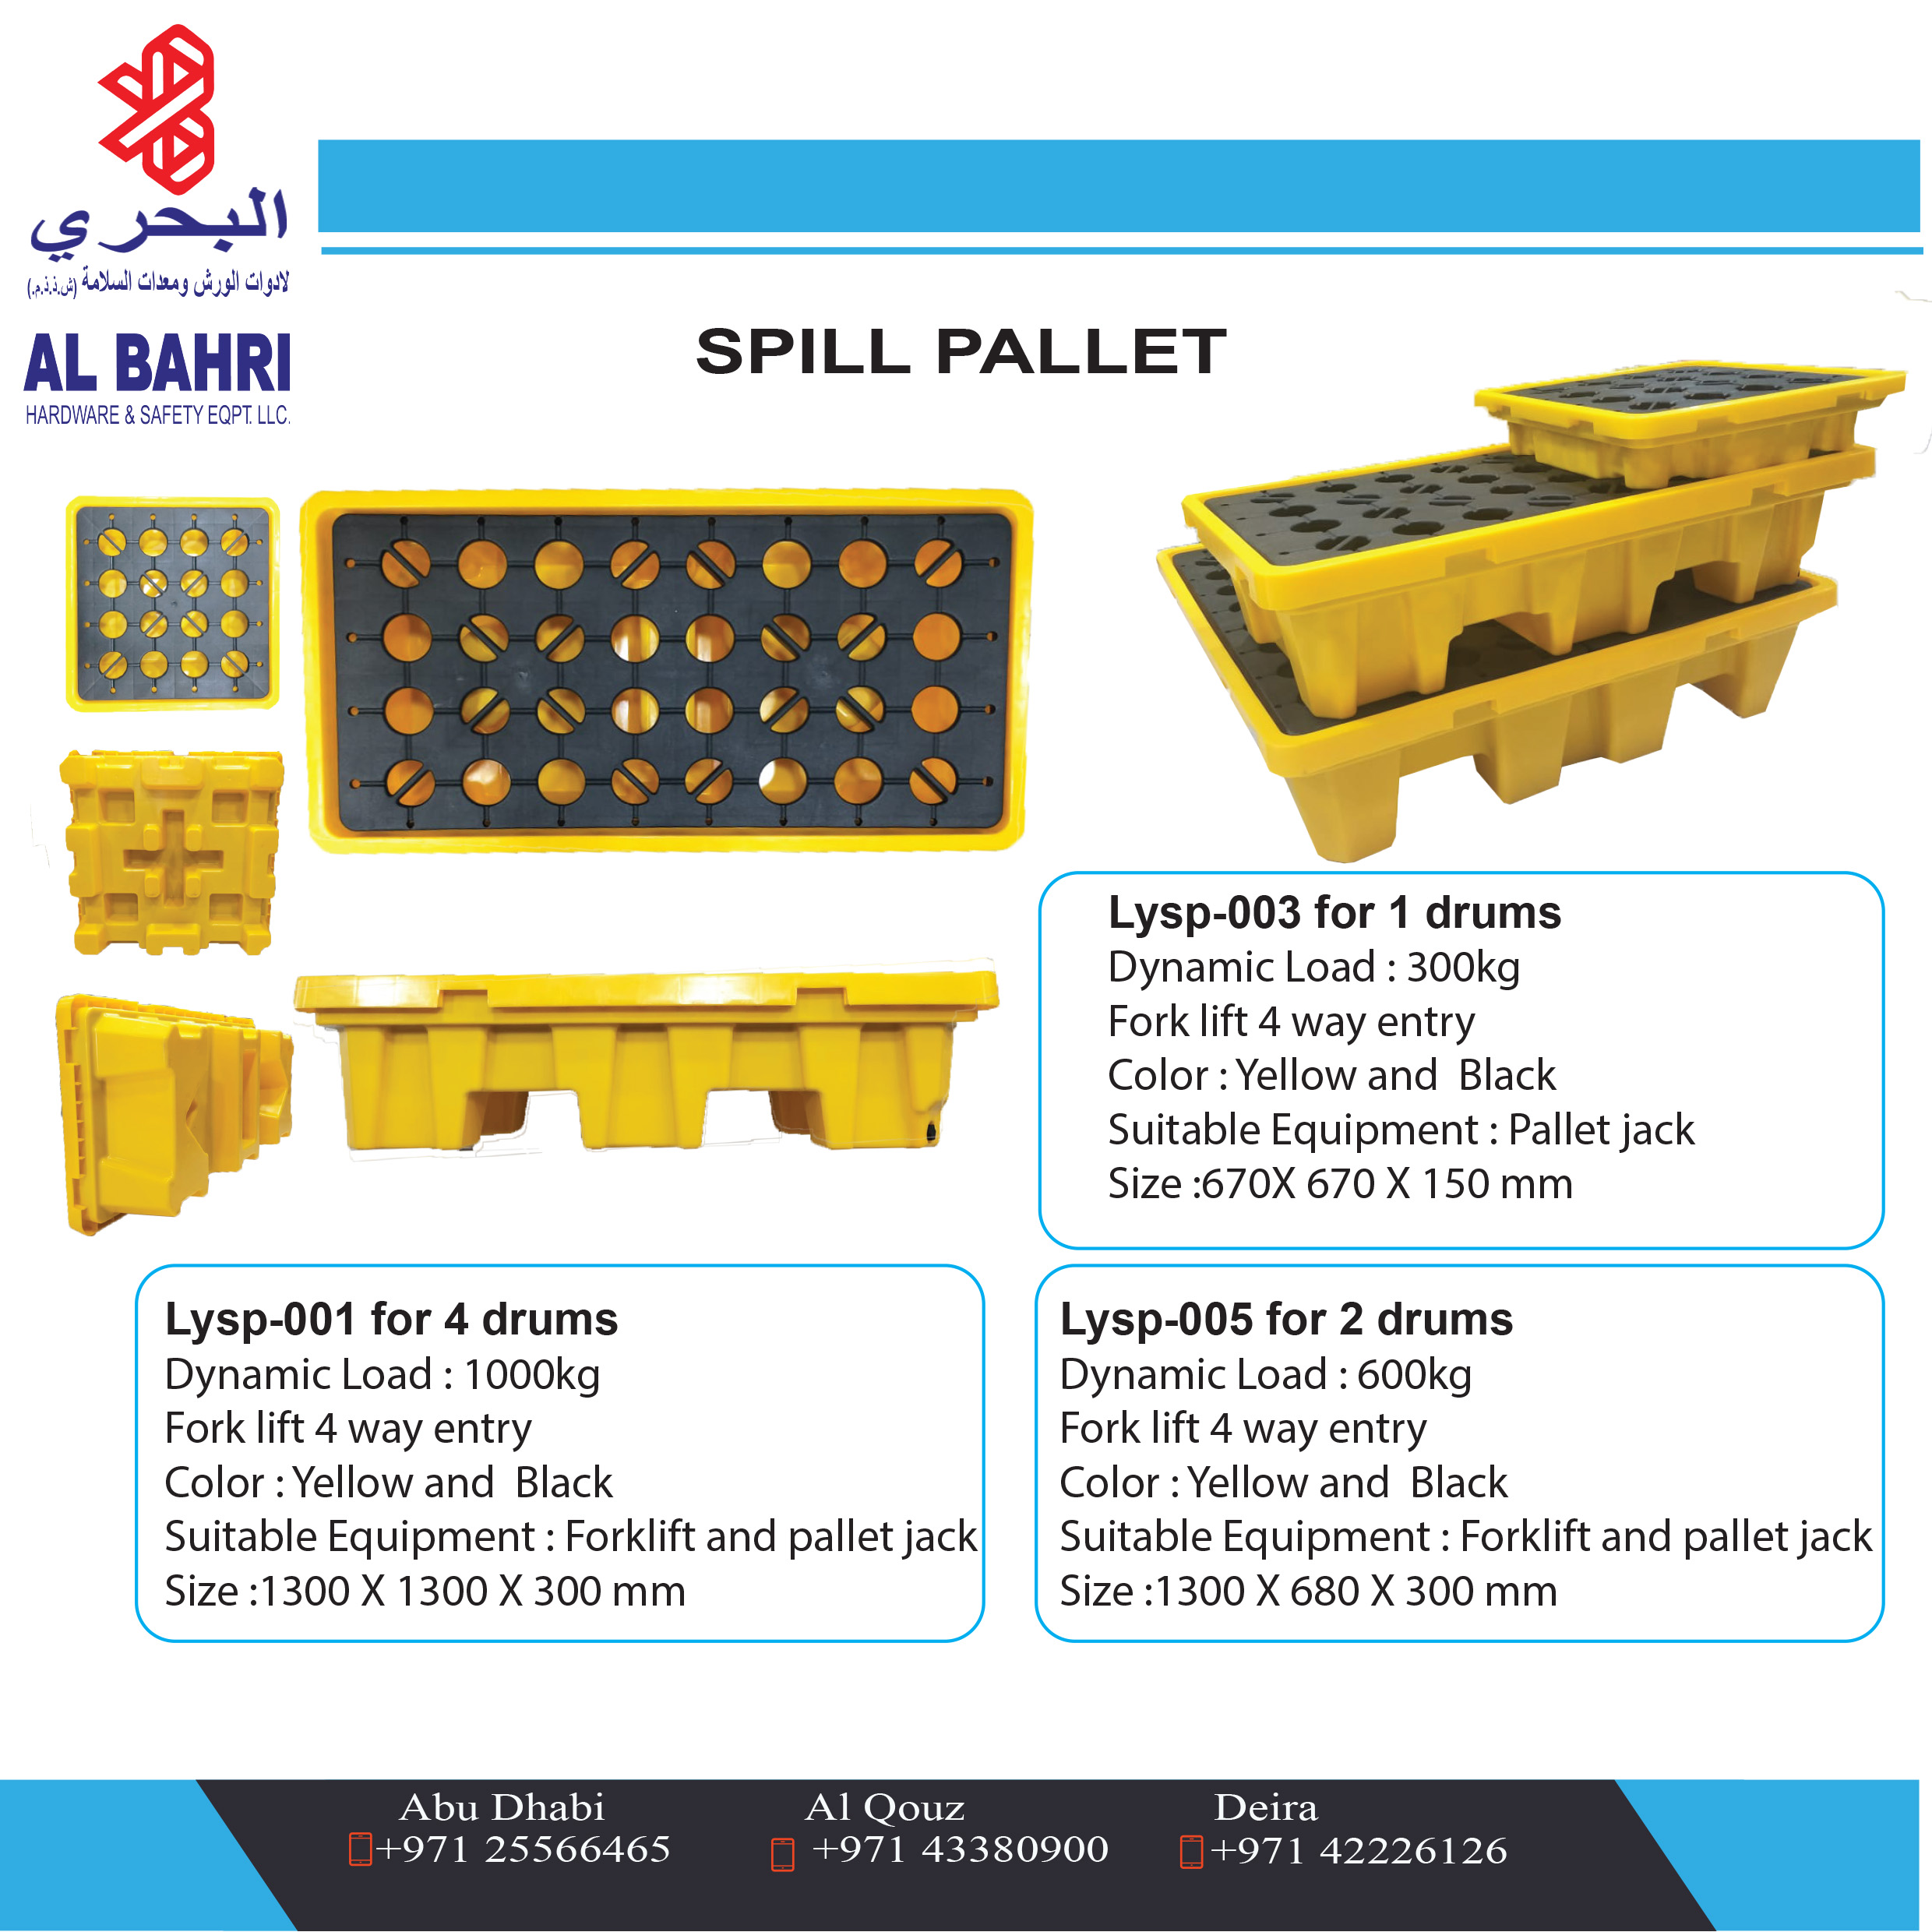 Spill Pallet for Drums